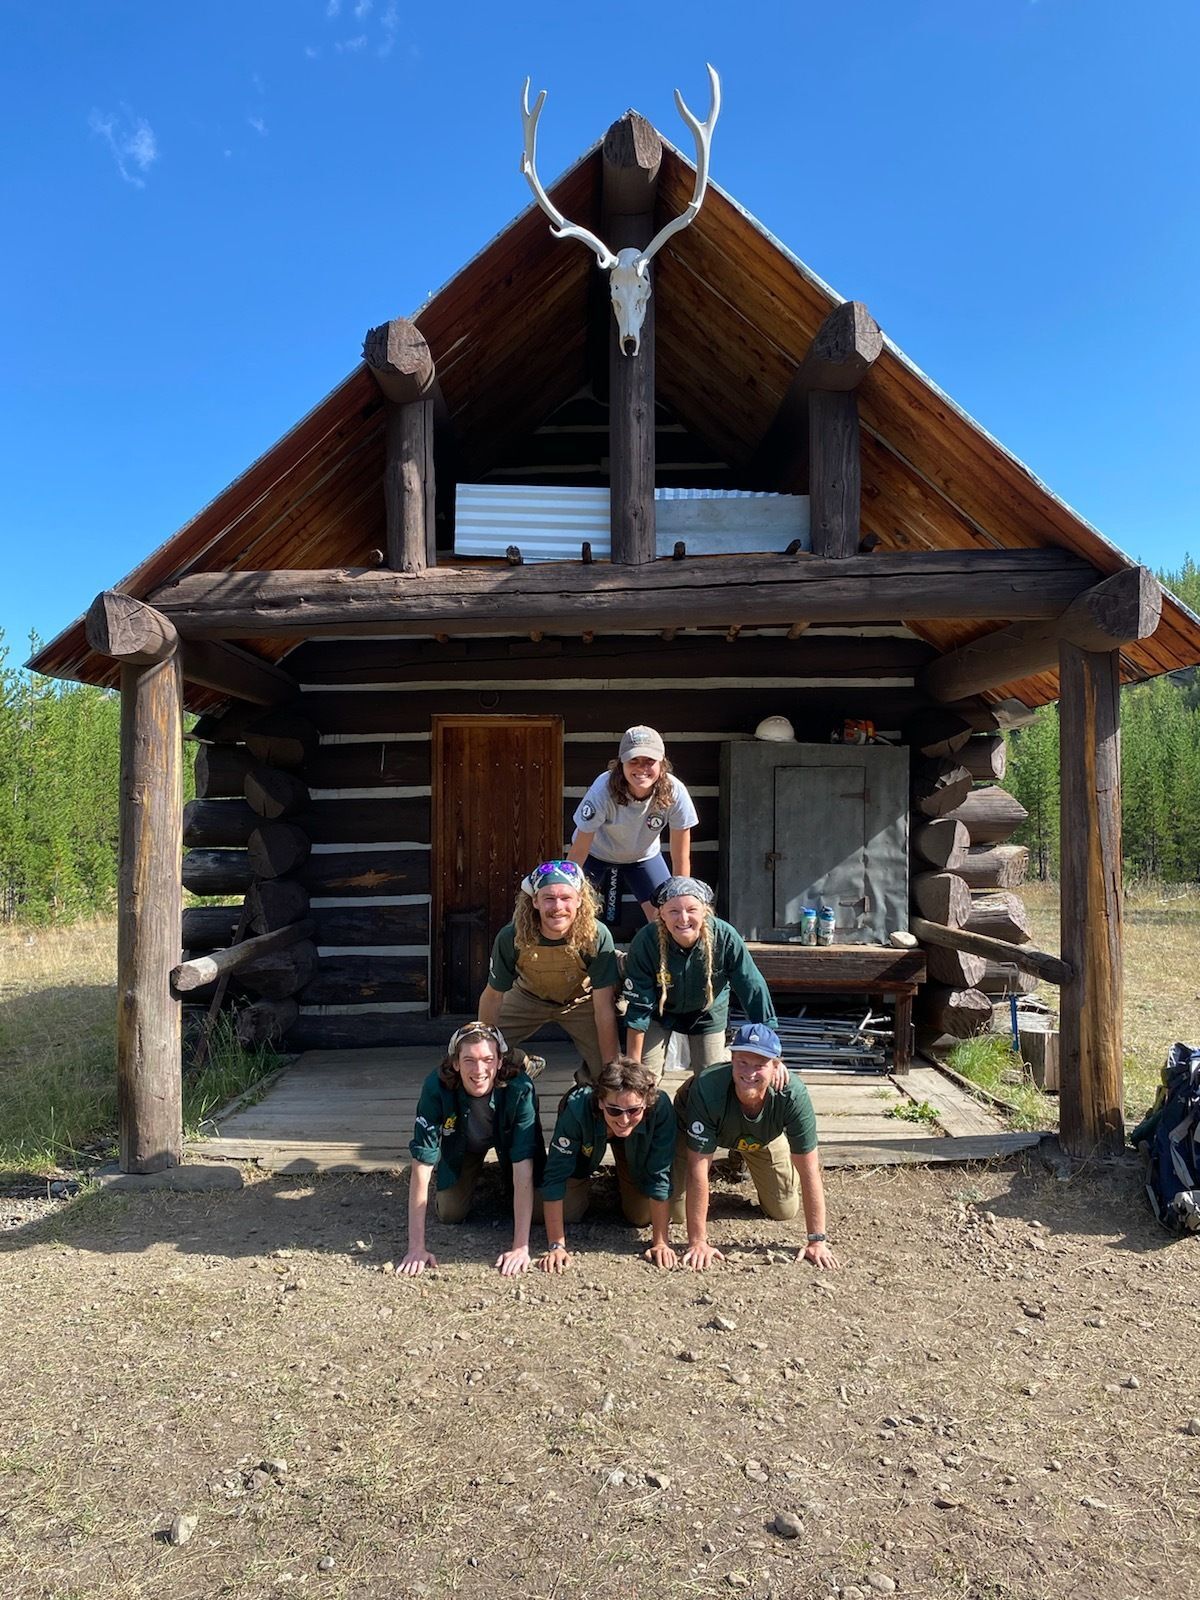 A crew forms a human pyramid. Behind them is a NPS cabin.